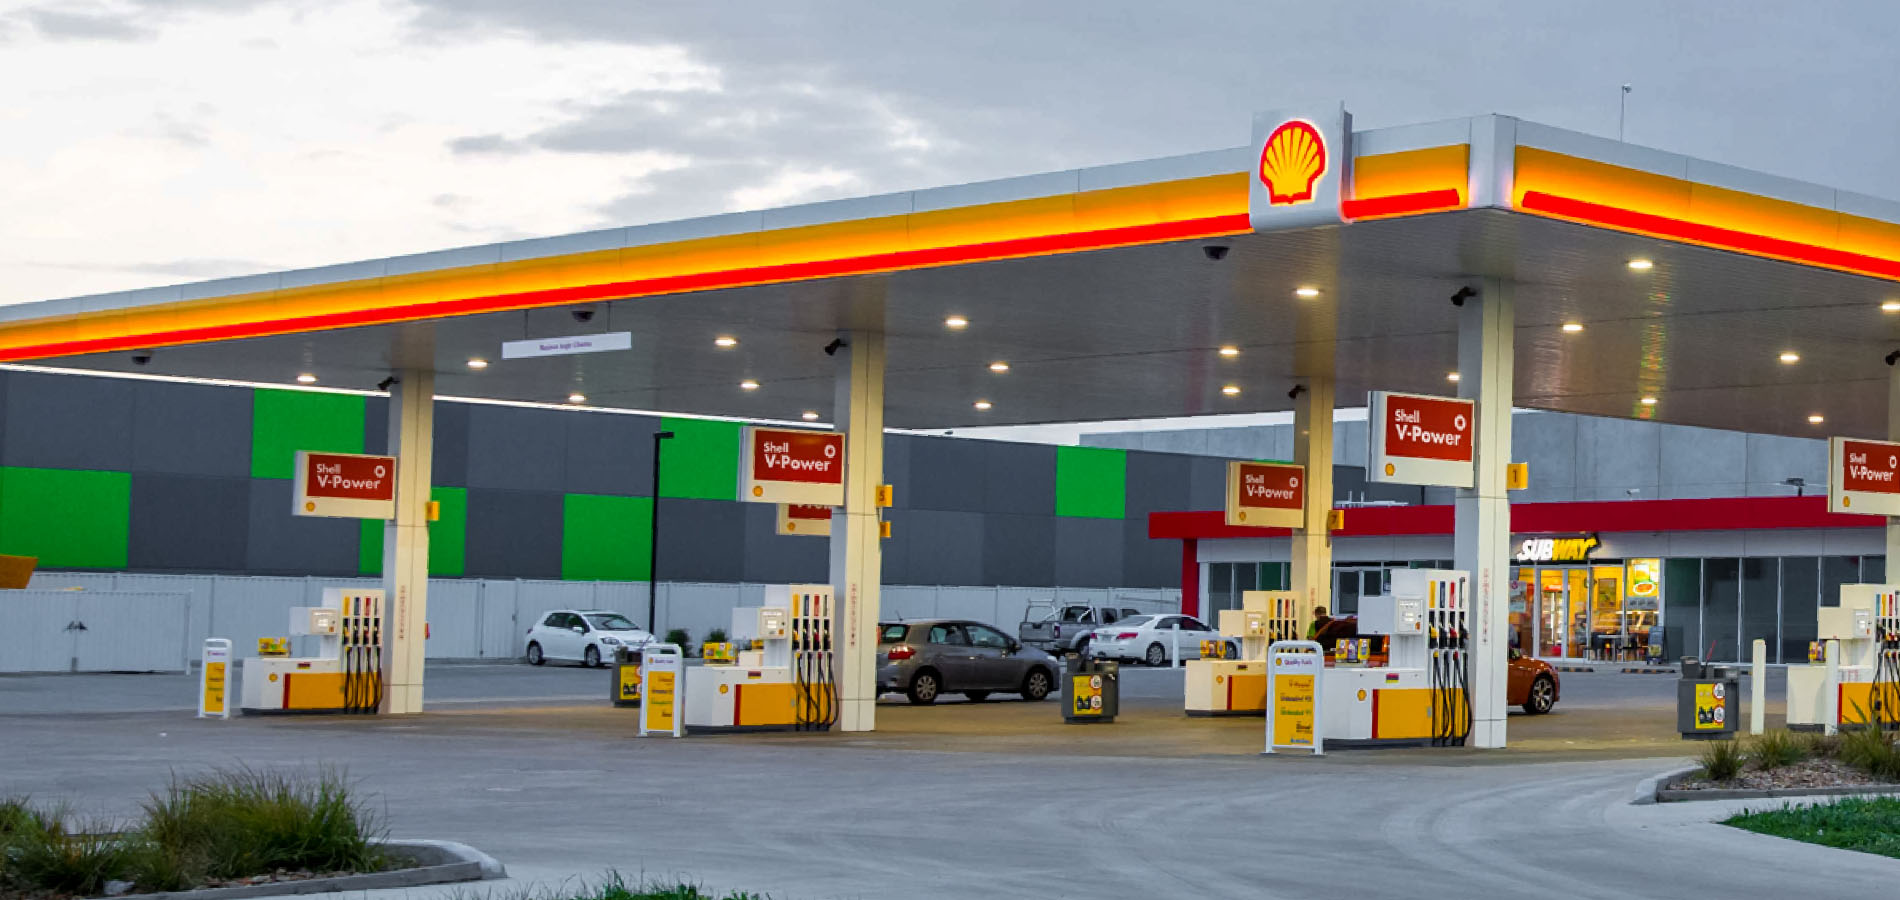 We provide high quality fuels at our network of Shell and Liberty service stations across Australia.